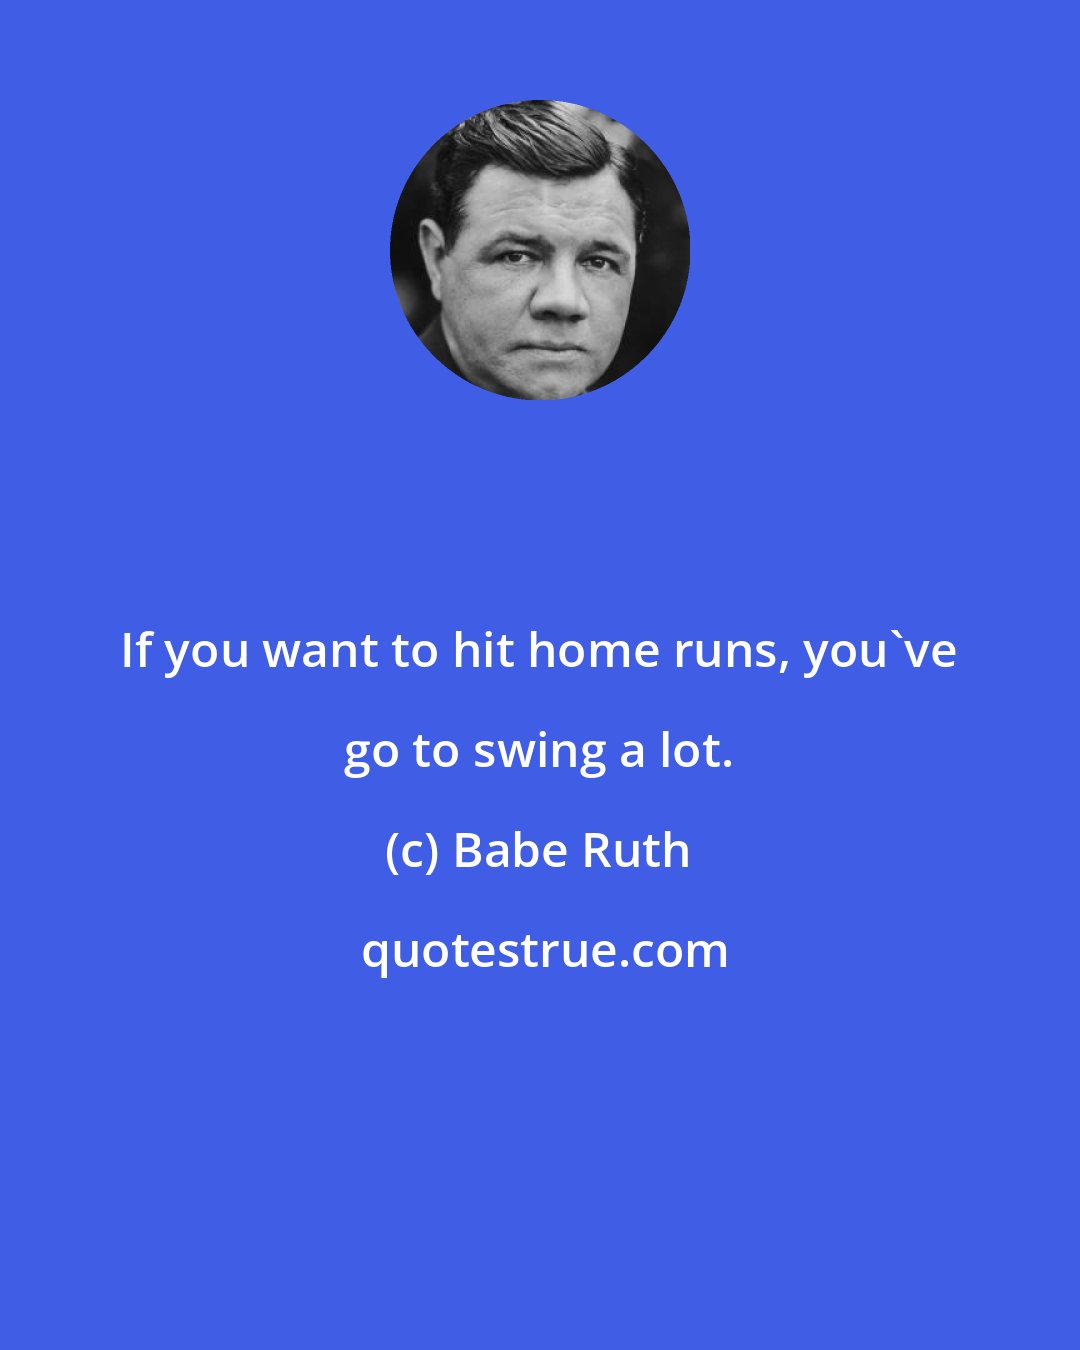 Babe Ruth: If you want to hit home runs, you've go to swing a lot.